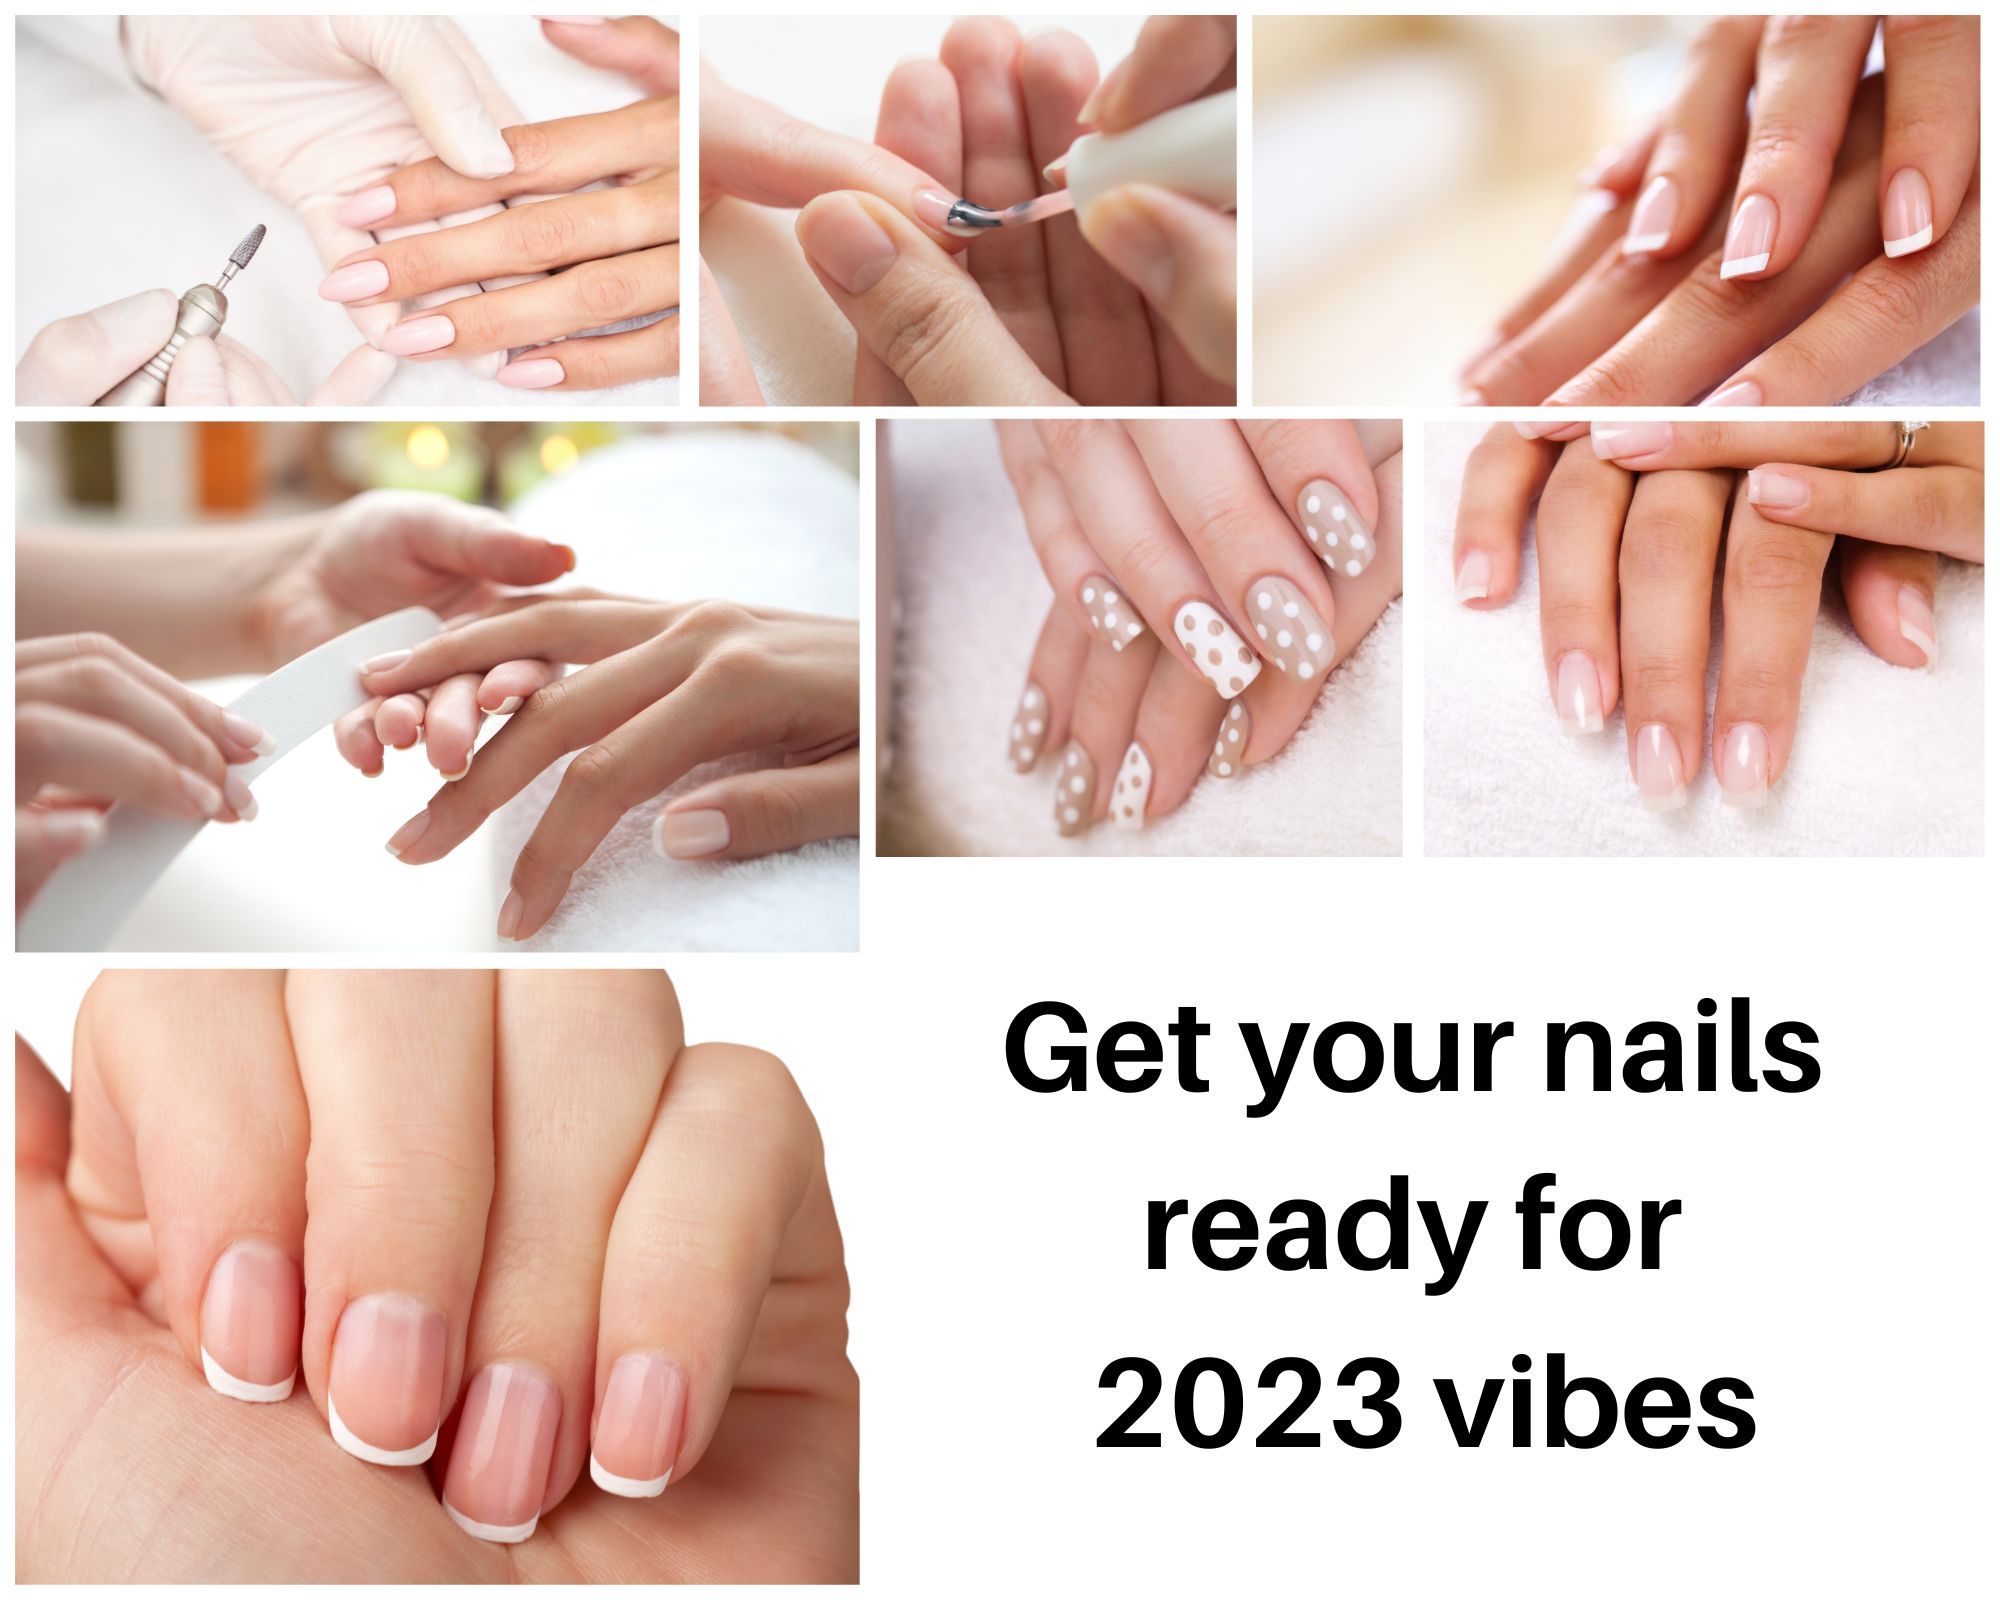 Get your nails ready for 2023 vibes